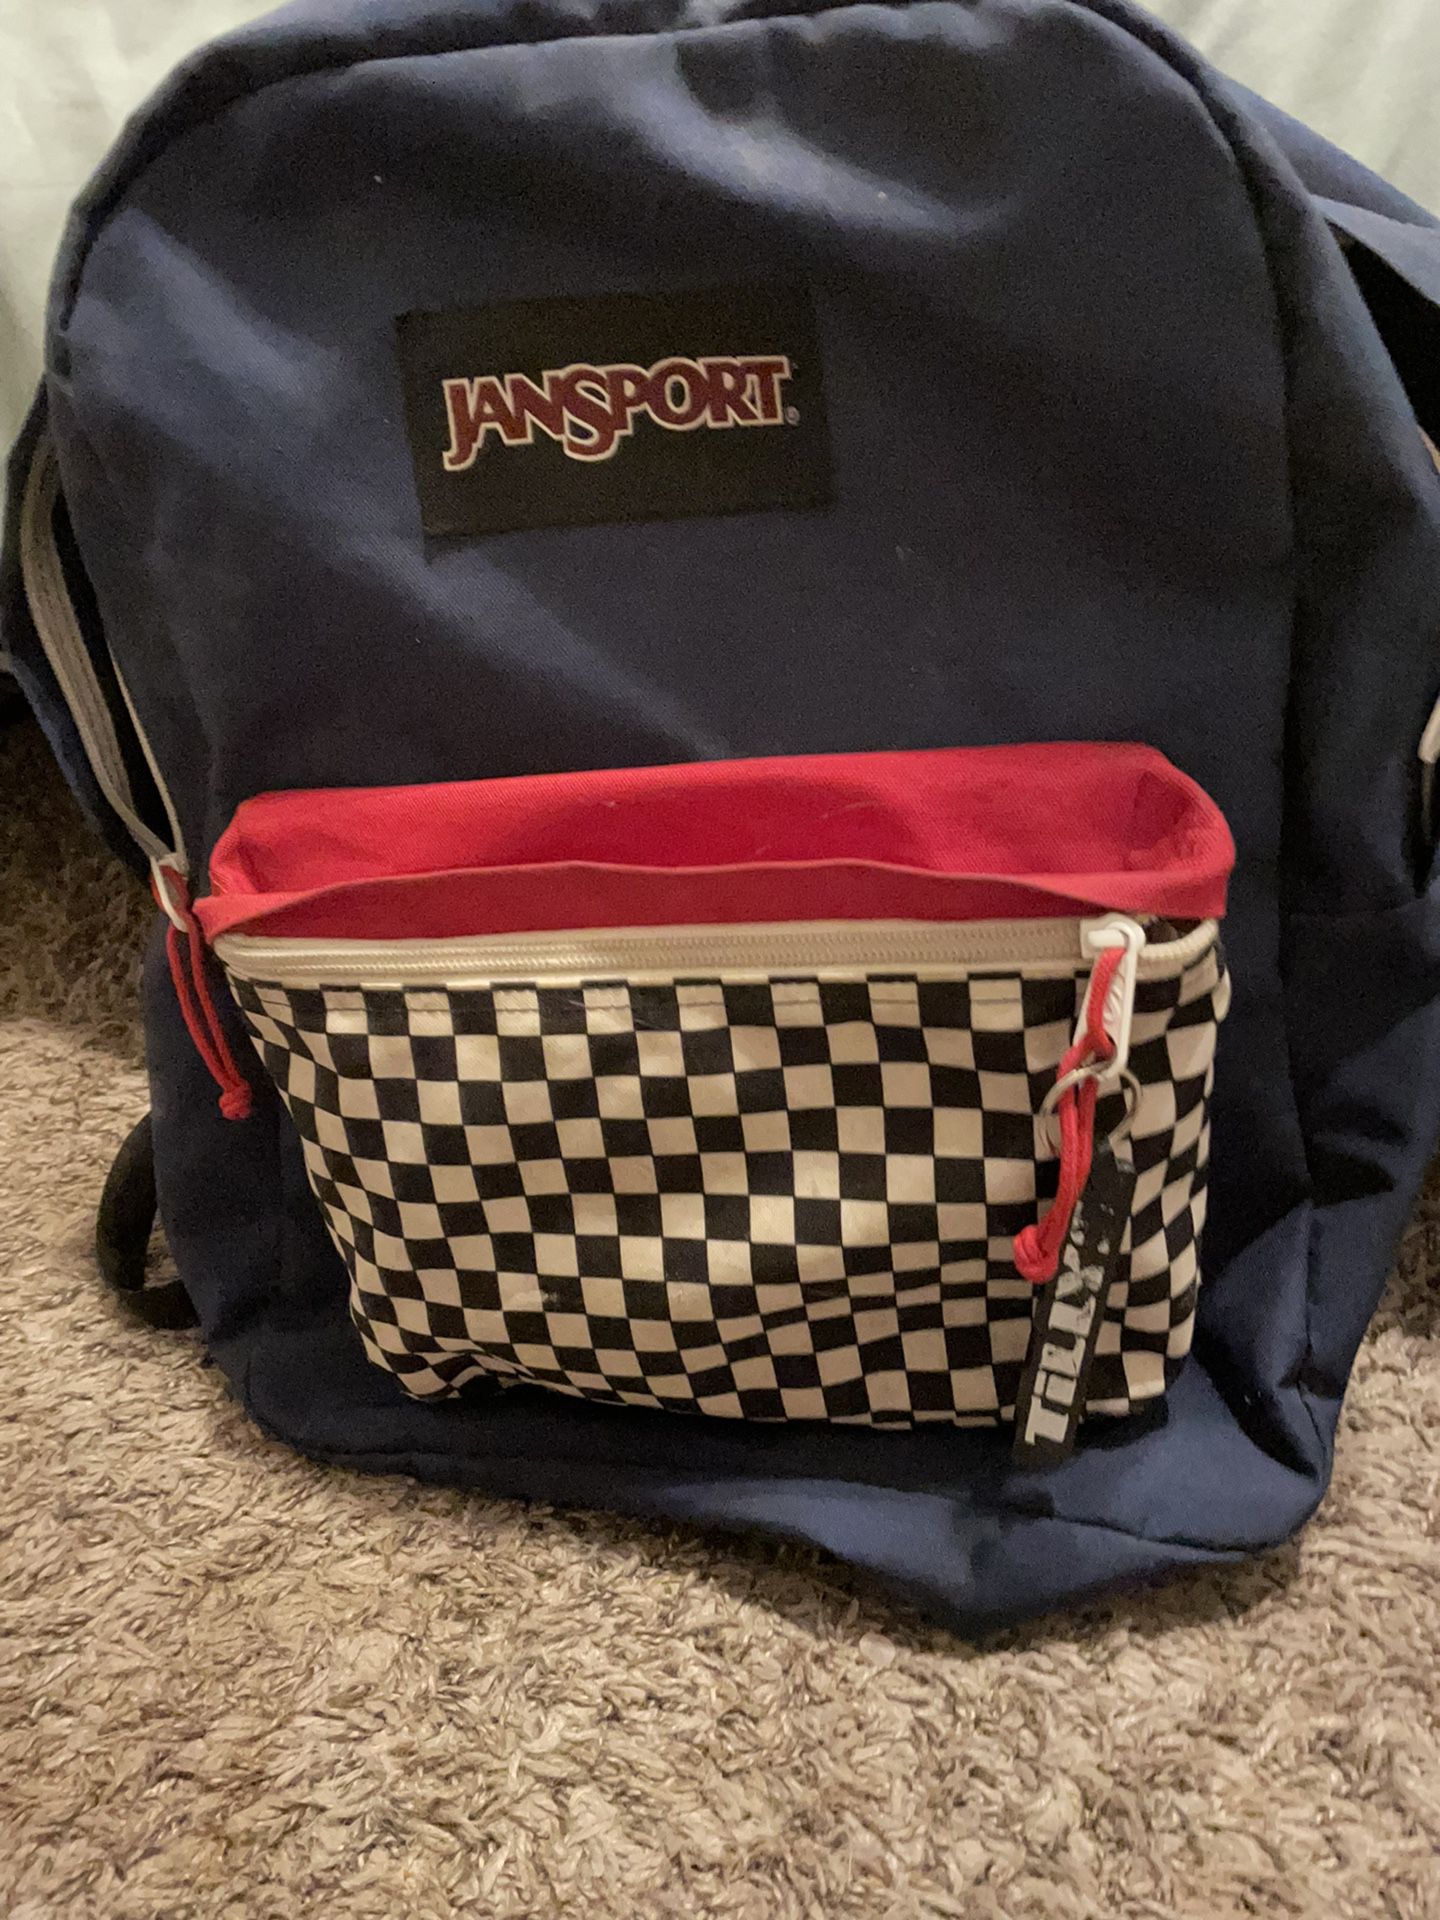 Jansport Backpack From Tillys! Great Condition